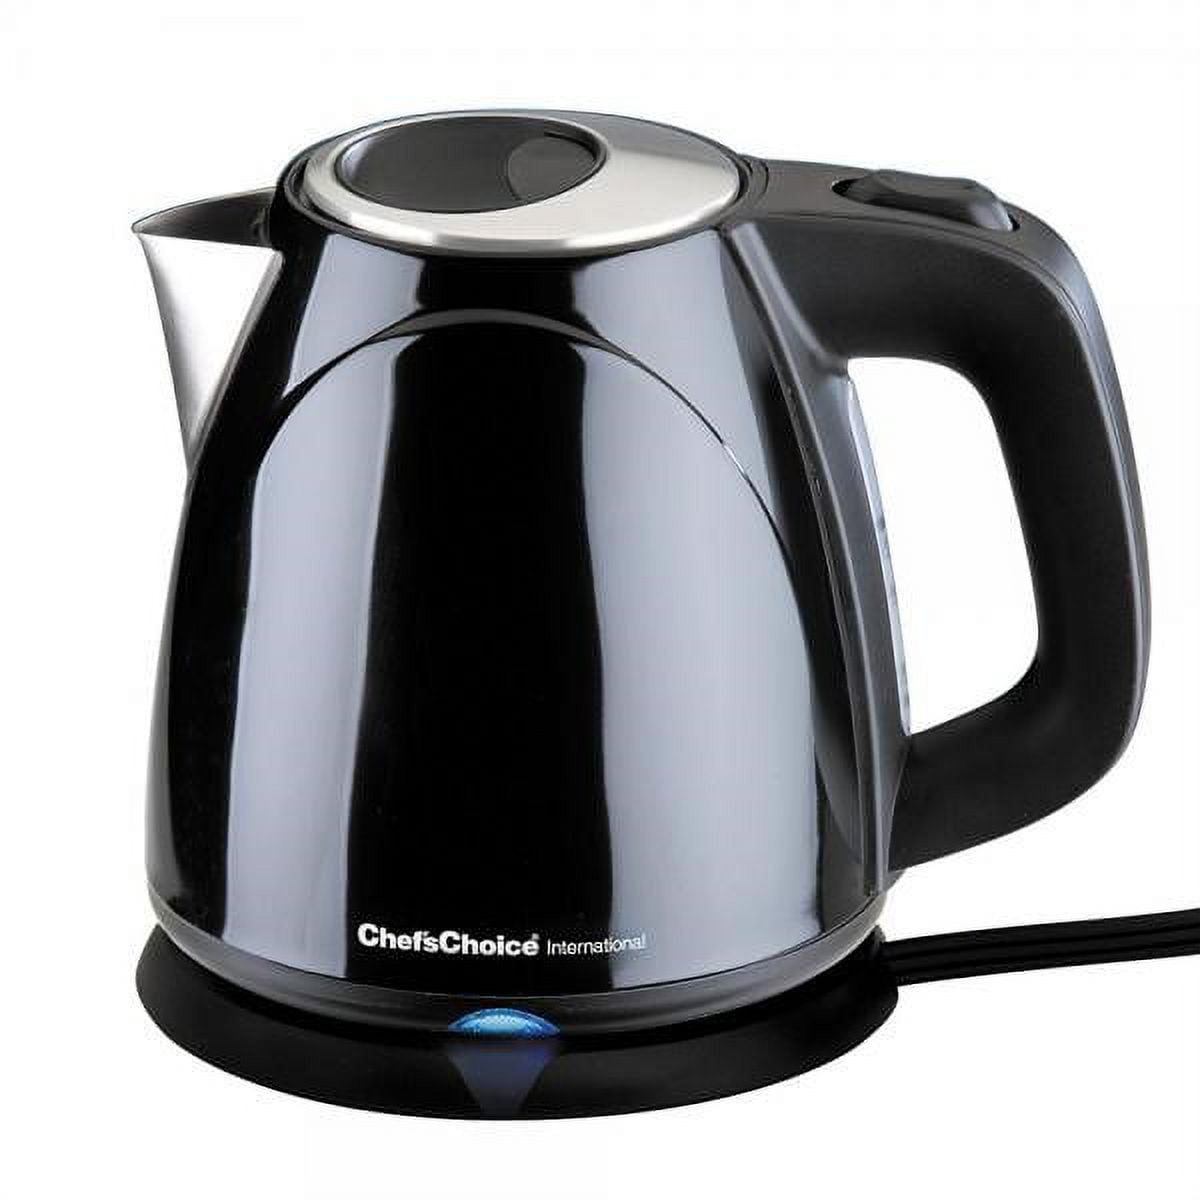 Chef's Choice 1 Quart Stainless Steel Cordless Electric Tea Kettle - Black